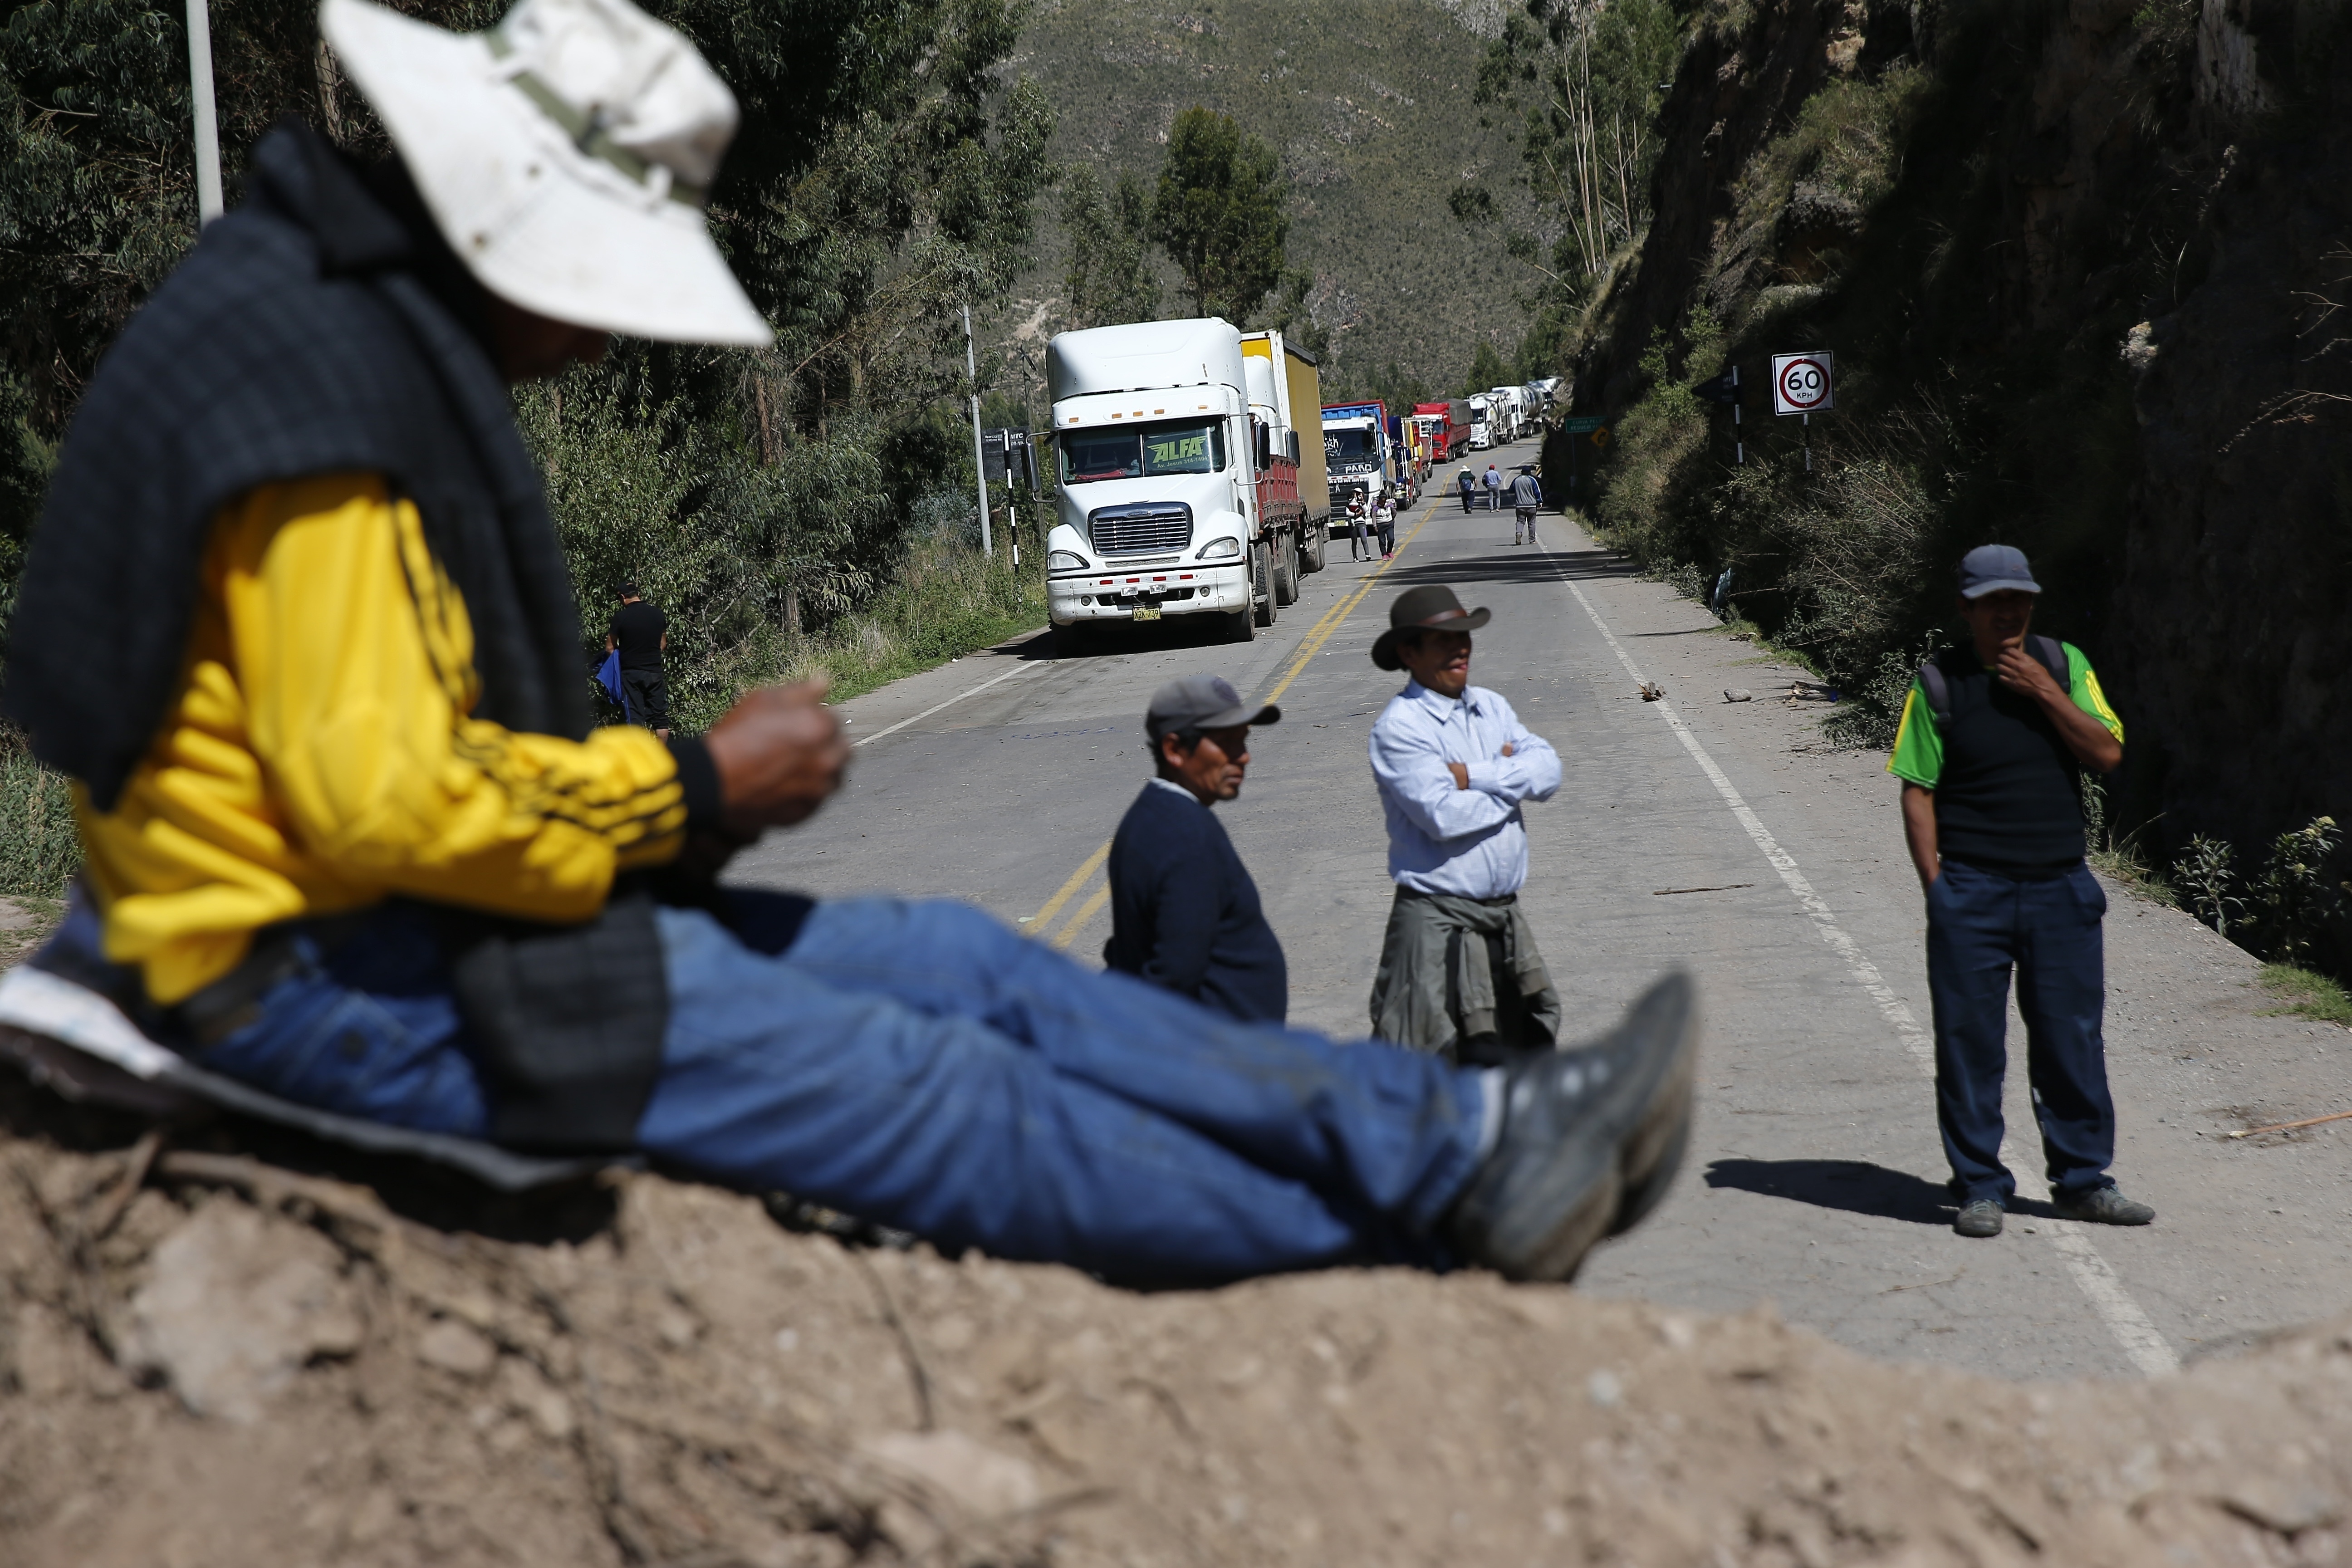 Anti-government protesters block the Pan-American highway in Cusco, Peru, Friday, January 13, 2023. The protesters demand an immediate electoral advance, the resignation of Boluarte, the release of impeached President Pedro Castillo, and justice for the 48 protesters killed in clashes. with the police.  (AP Photo/Hugo Curotto)